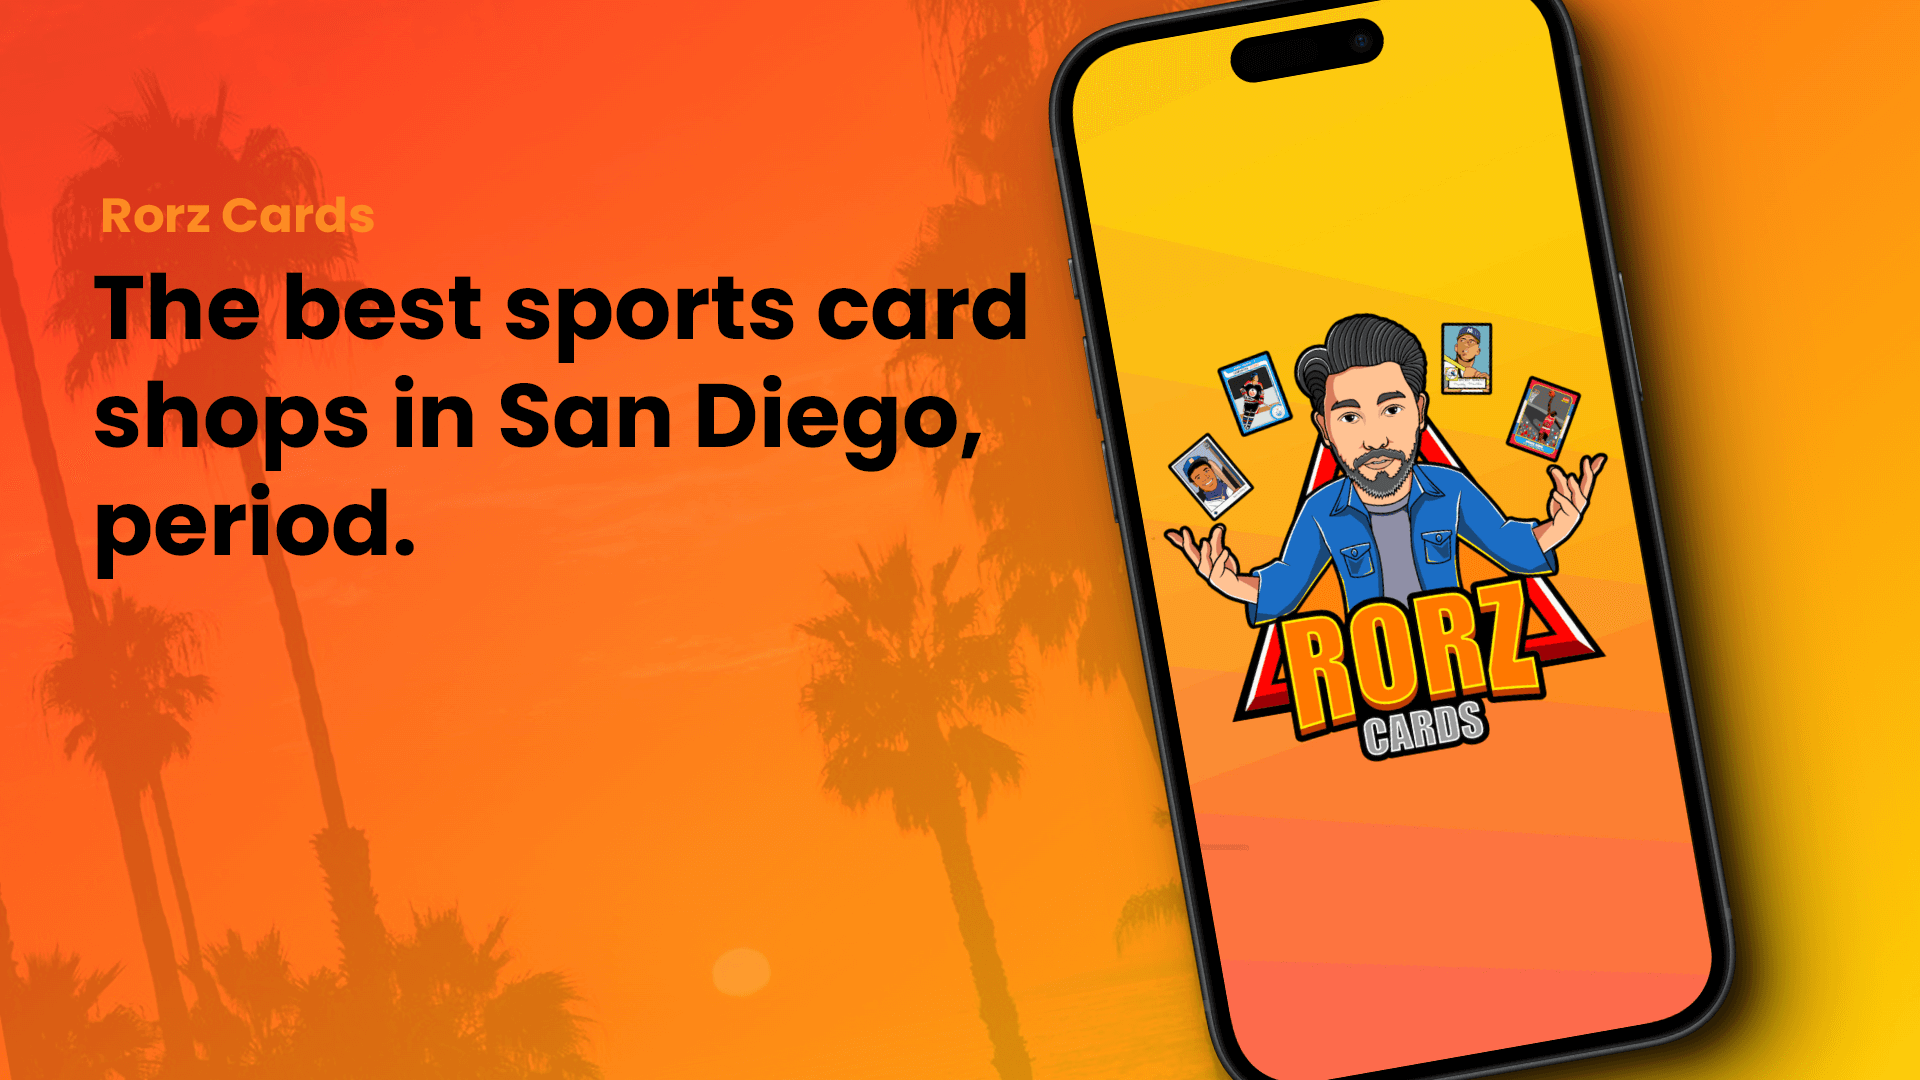 The best sports card shops in San Diego